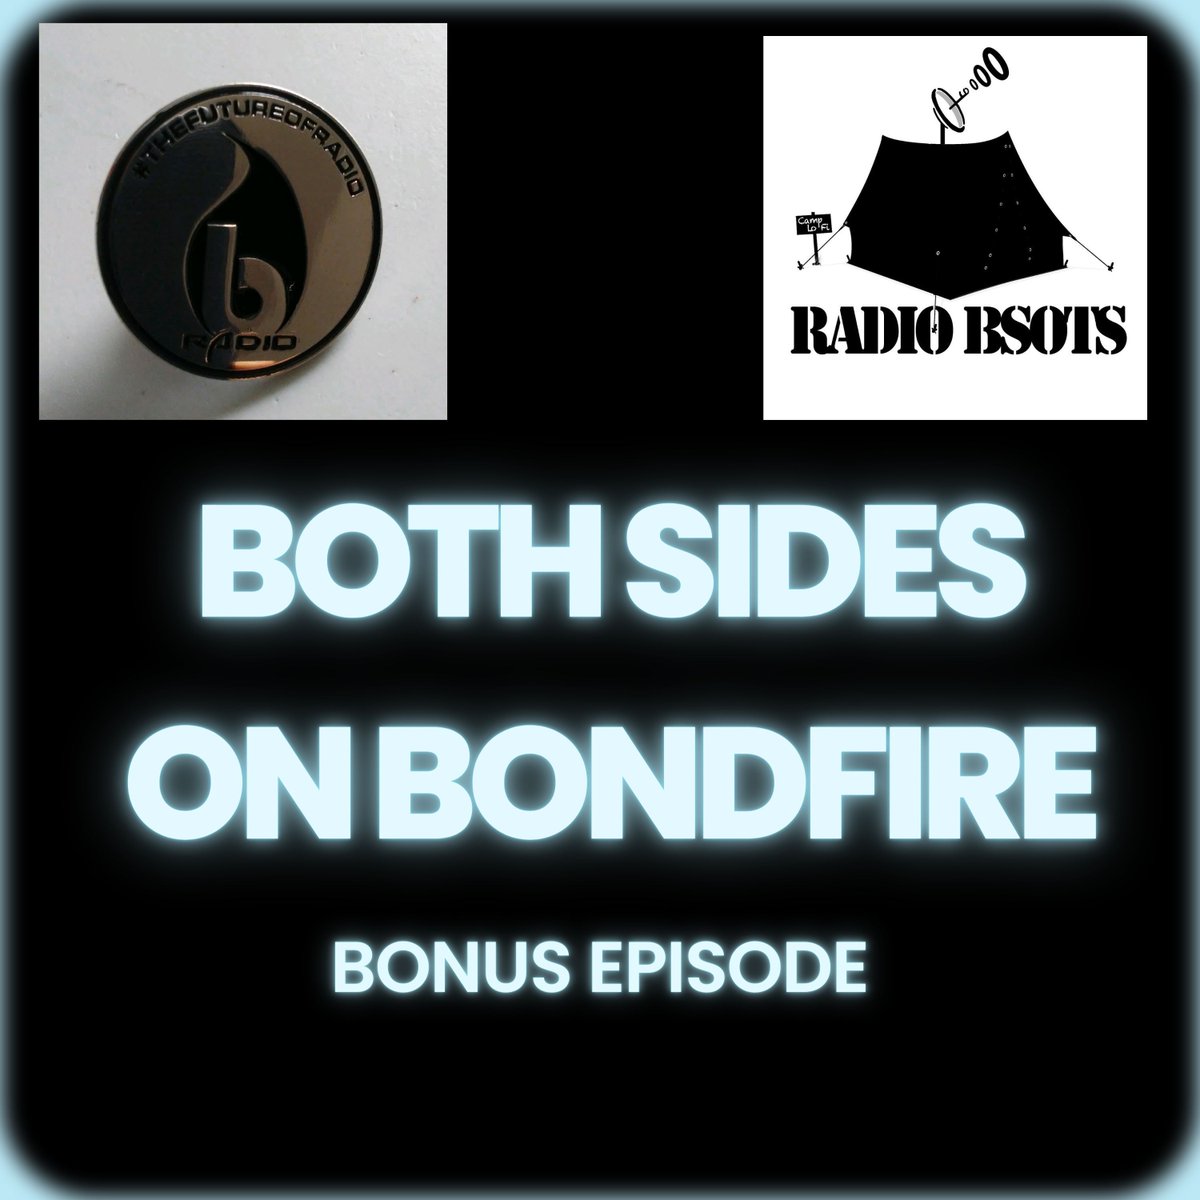 🚨BSOTS FEED BONUS! 🚨 Revisiting the first year of BSOTS on @BondfireRadio via music by @DJVadim & Sena, Romare, Semi Hendrix ( @RasKass & @SirJackSplash), @GregFoatGroup and so much more. Now available wherever you get your podcasts. 🎧 💻 🔊 buff.ly/4dq81s2